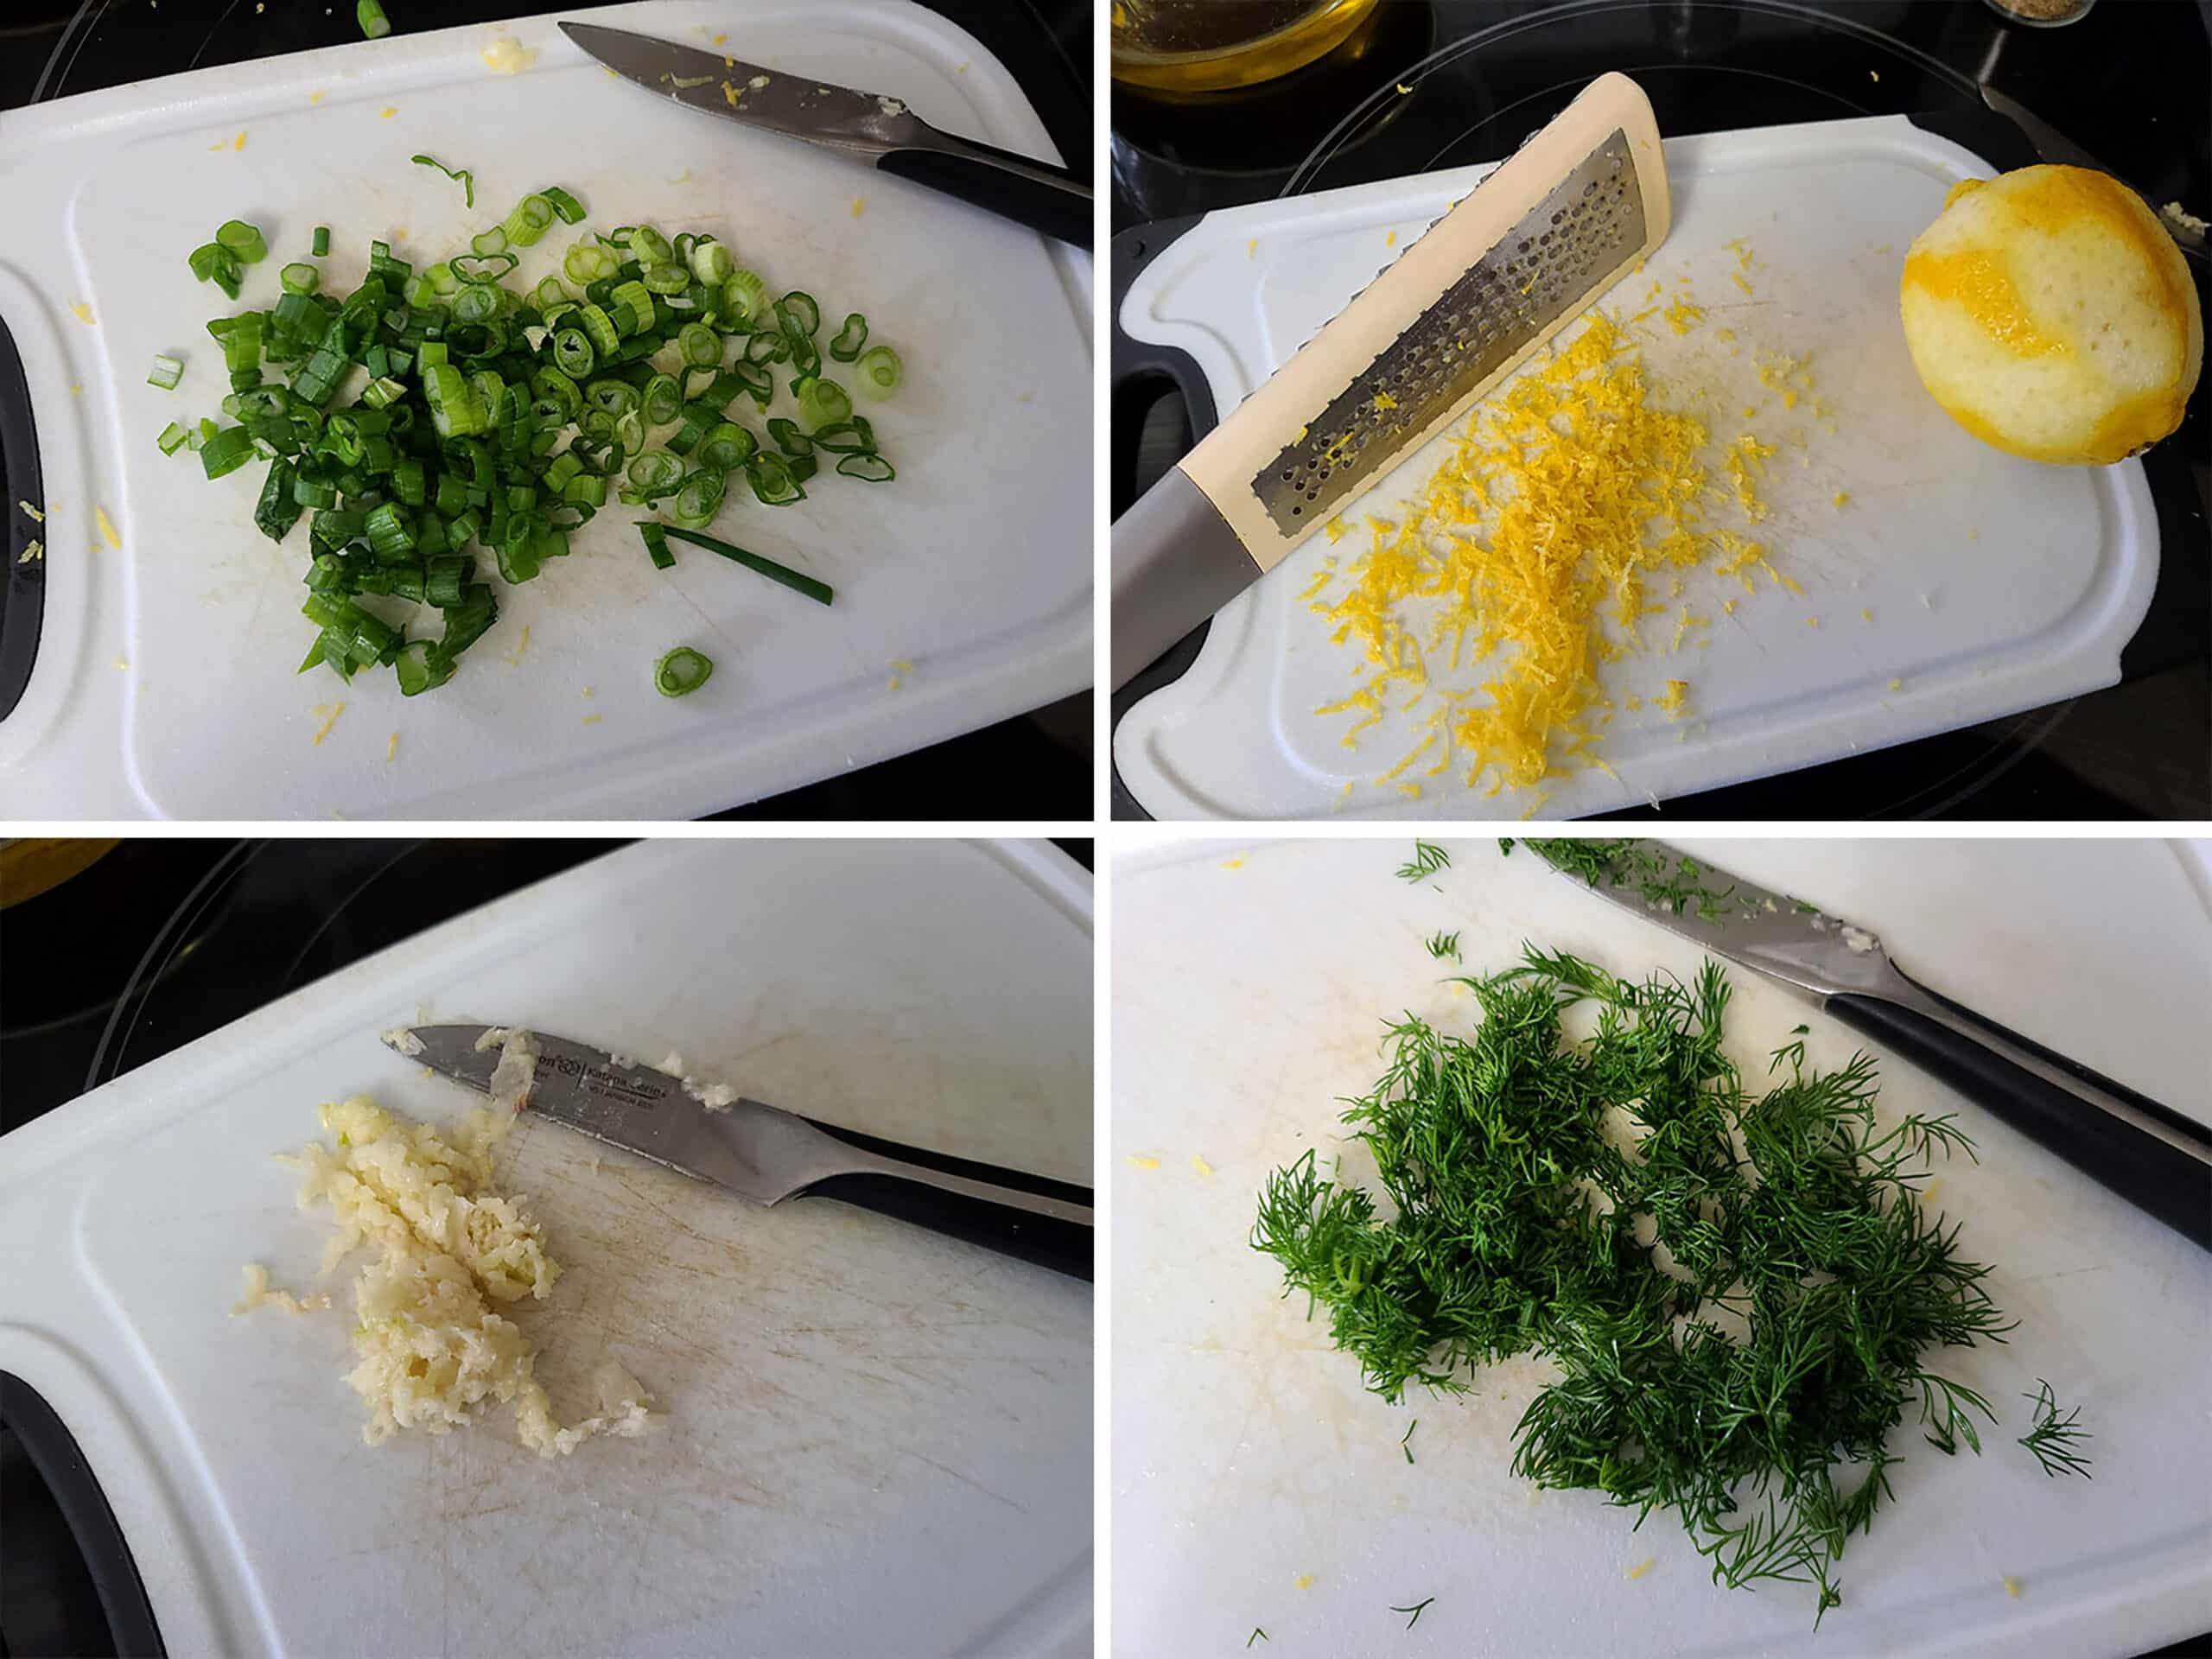 A 5 part image showing the lemon zest, garlic, and fresh herbs being prepared.